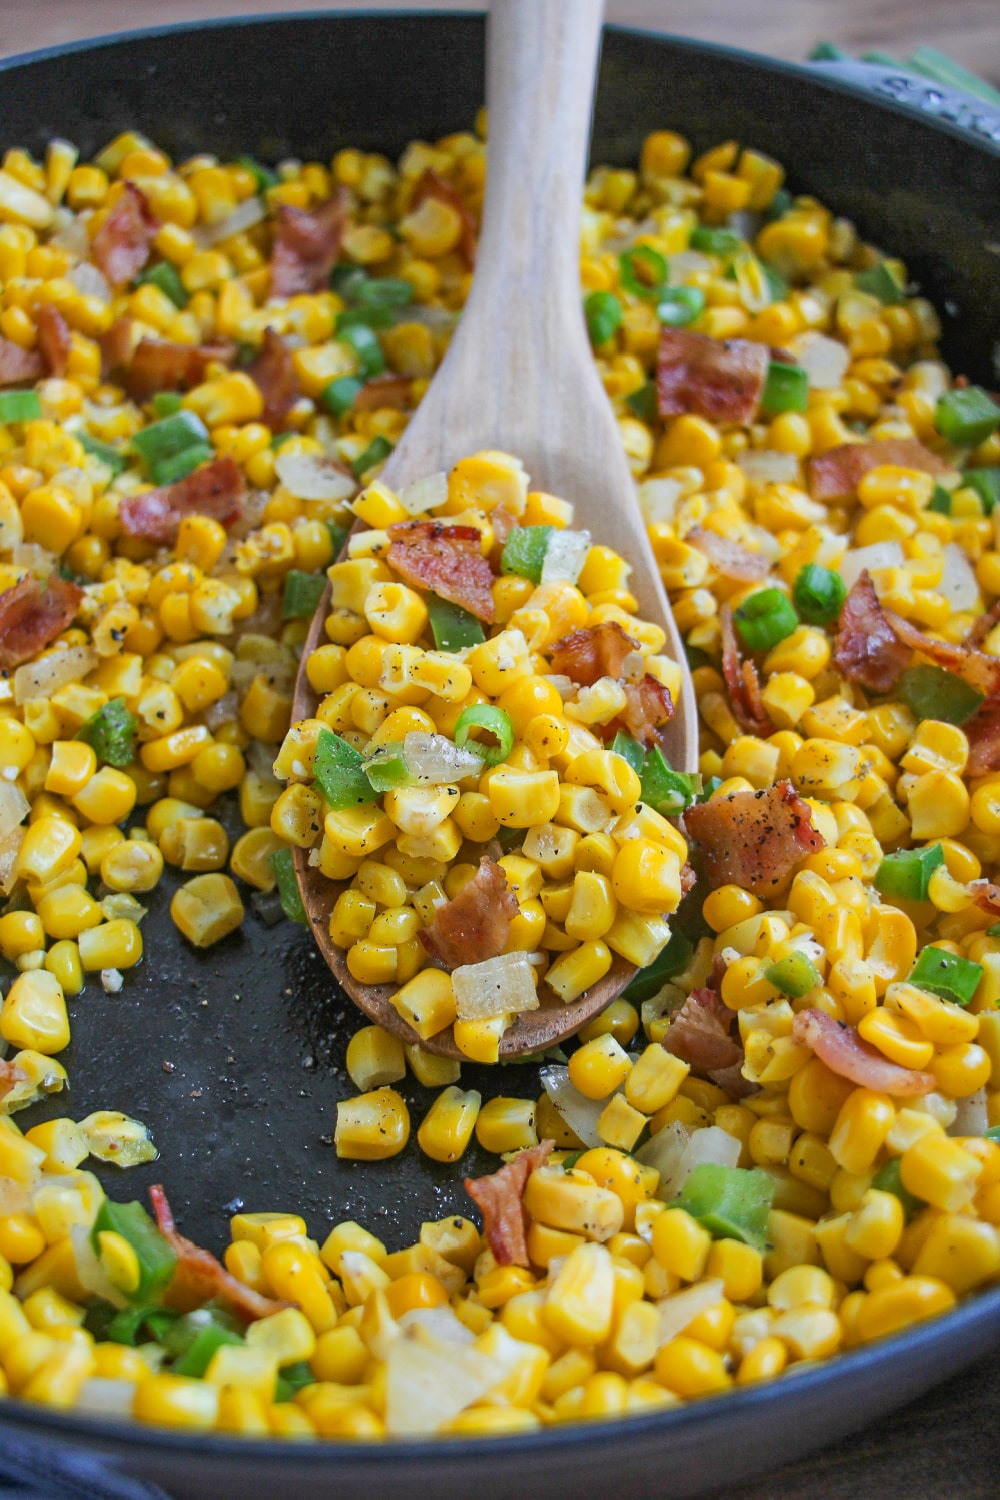 A wooden spoon filled with fried corn rest in a skillet.